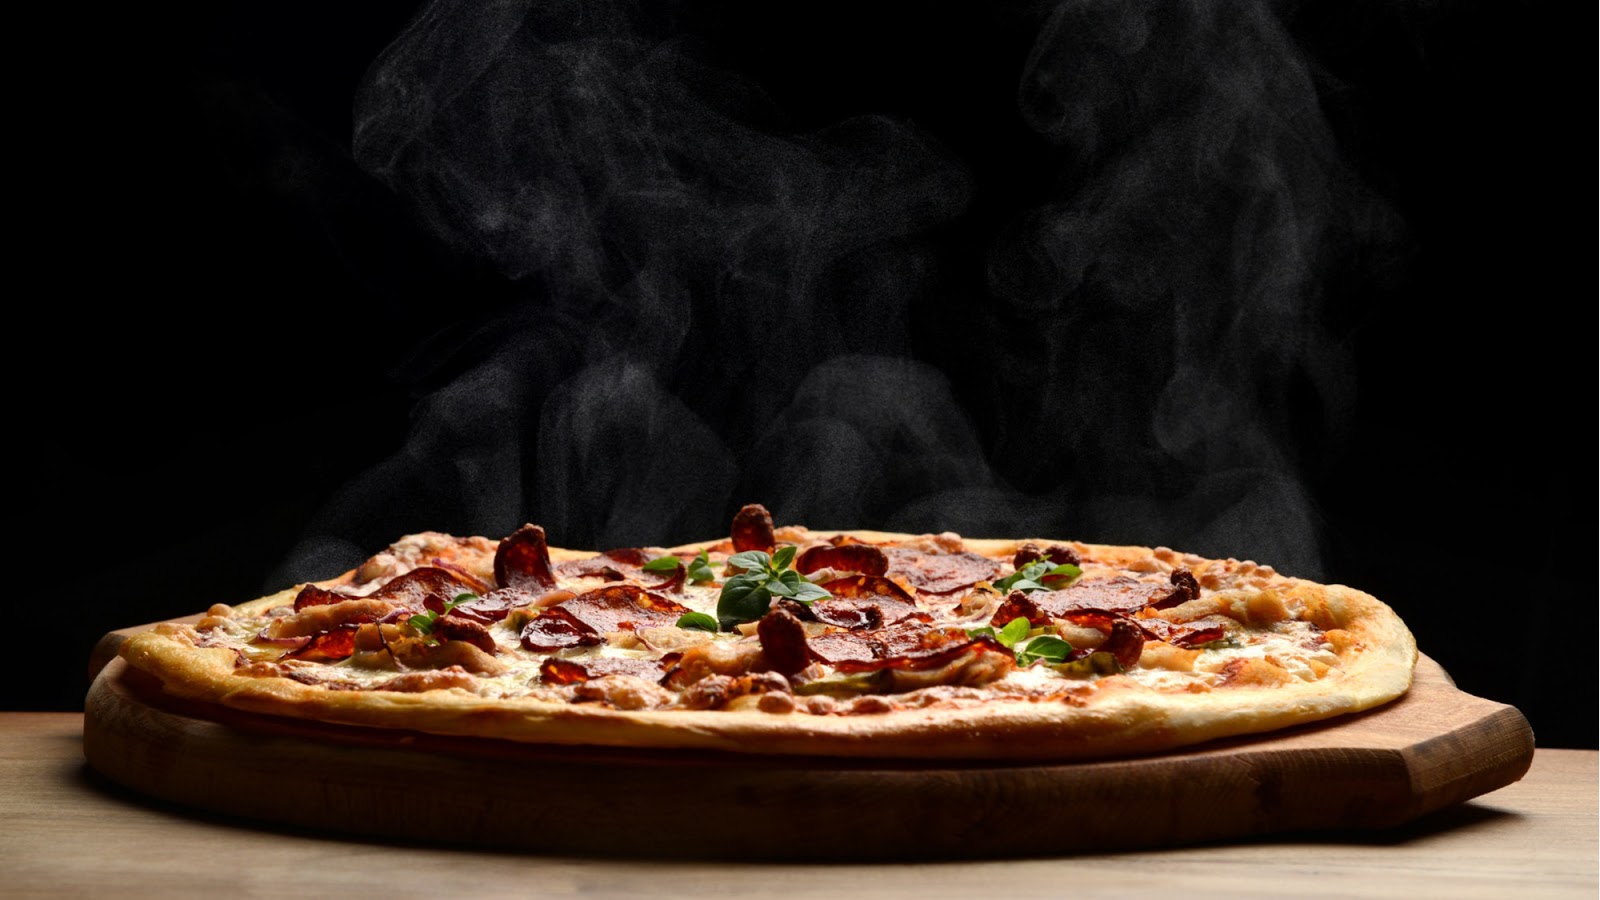 The World’s Most Expensive Food Bought Was 2 Papa John’s Pizzas